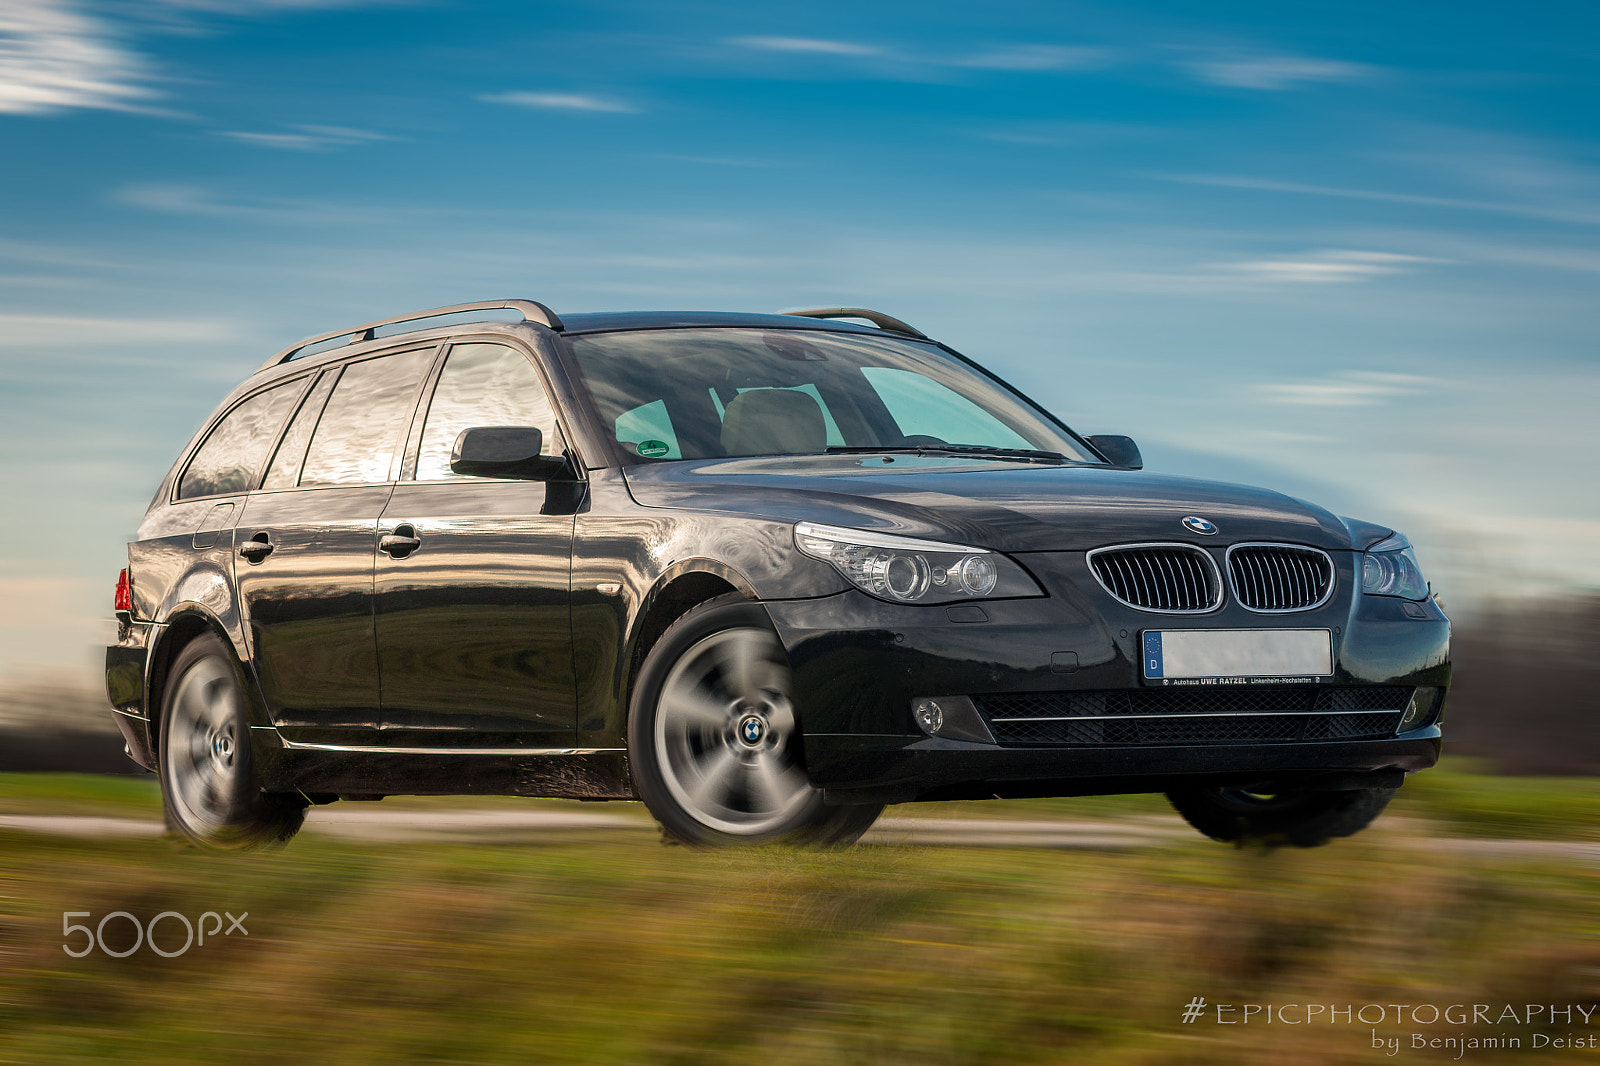 Sony Alpha DSLR-A700 sample photo. Bmw 530d touring photography